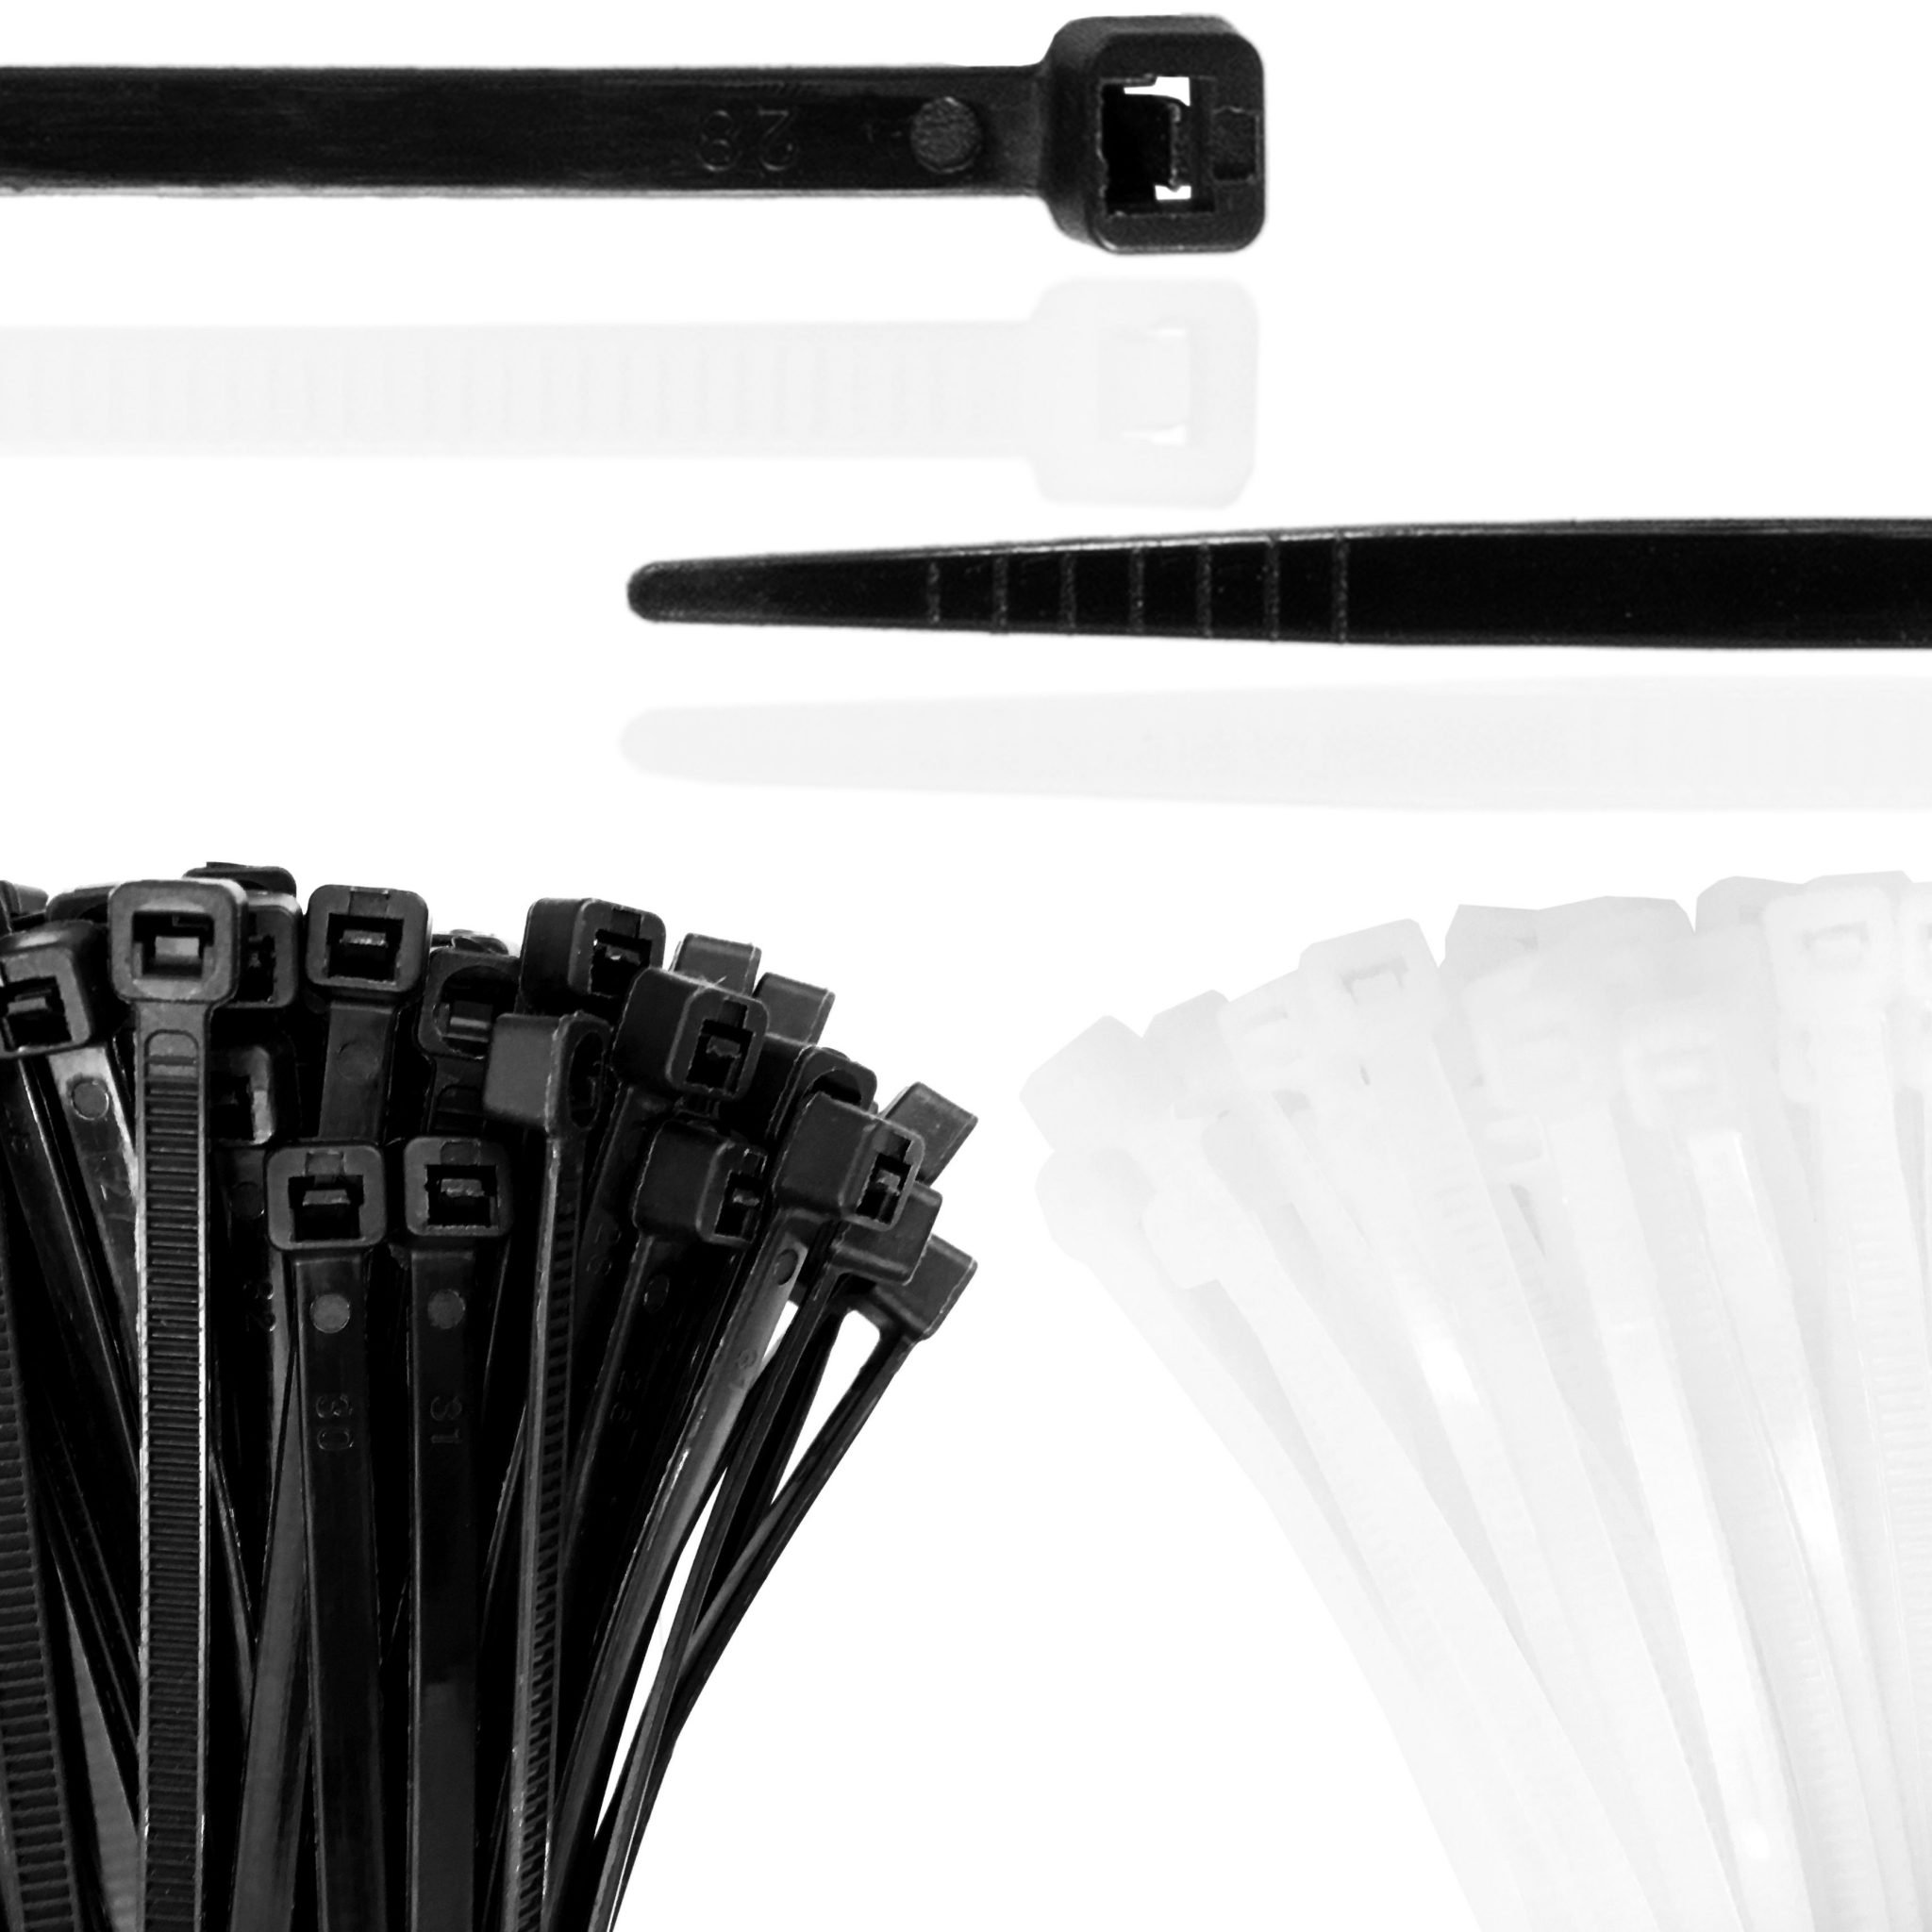 Beadnova Cable Ties 100 Pcs Tie Wraps Zip Ties Heavy Duty for Multi-Purpose 8 Inch, Black and White, 50pcs for Each 